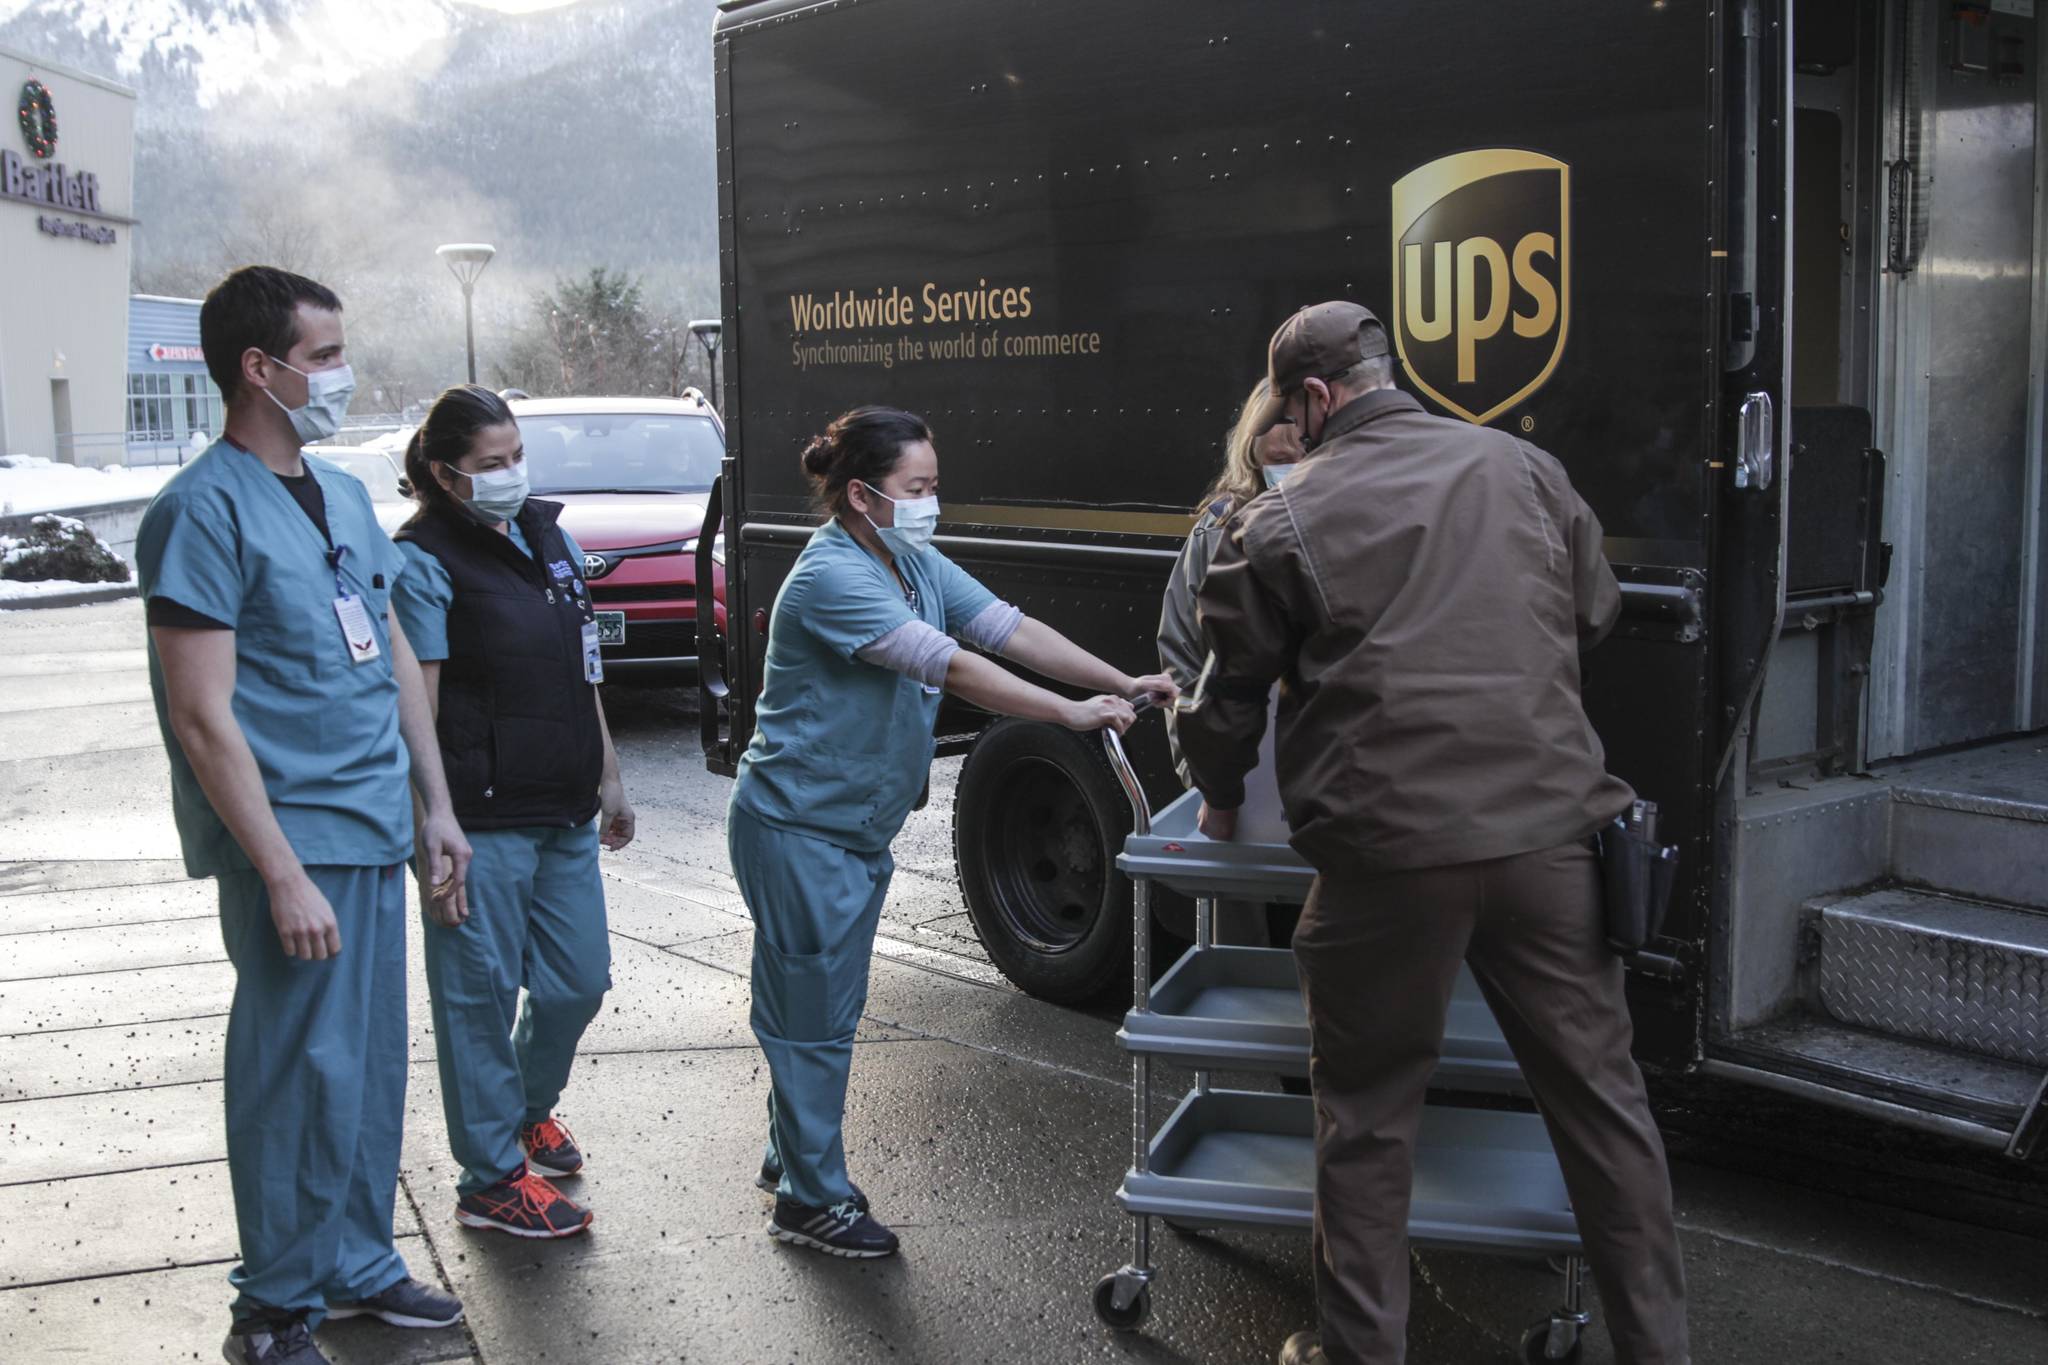 Michael S. Lockett / Juneau Empire 
Bartlett Regional Hospital pharmacy personnel Justin Richardson, Andrea Stats, Krischelle Batac, and Ursula Iha take delivery of the first shipment of the coronavirus vaccine from a UPS employee on Dec. 15, 2020. BRH immediately began vaccinating its personnel upon receipt of the vaccine.